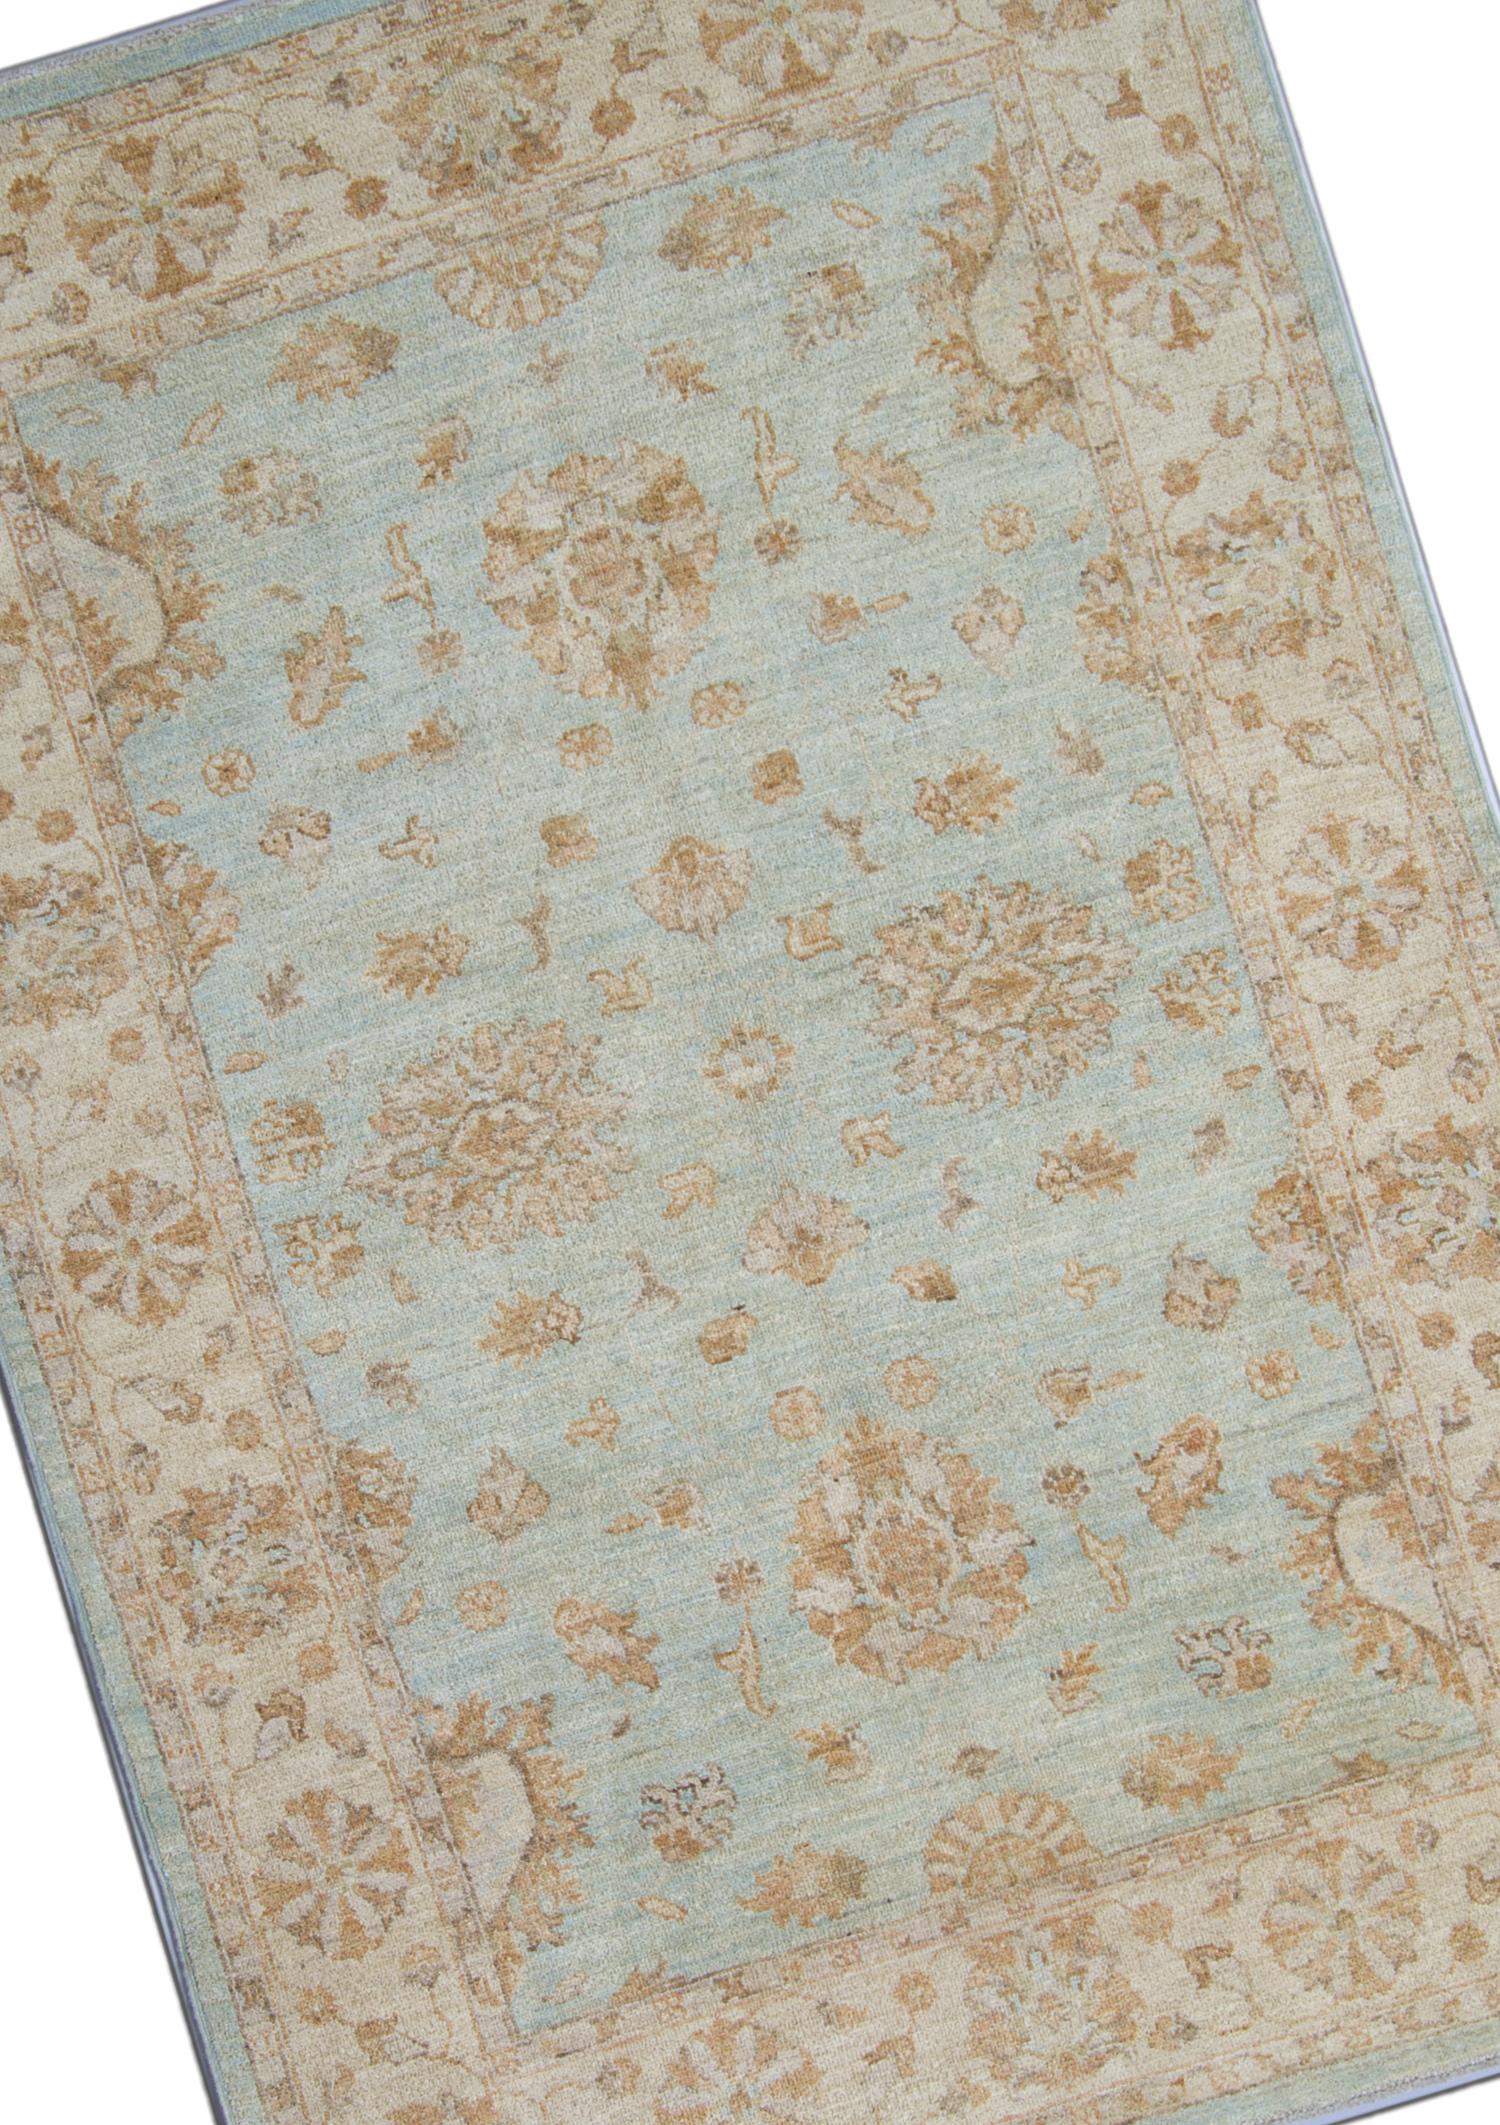 Country Handwoven Blue Rug Carpet Traditional Floral Area Rug All Over Design For Sale